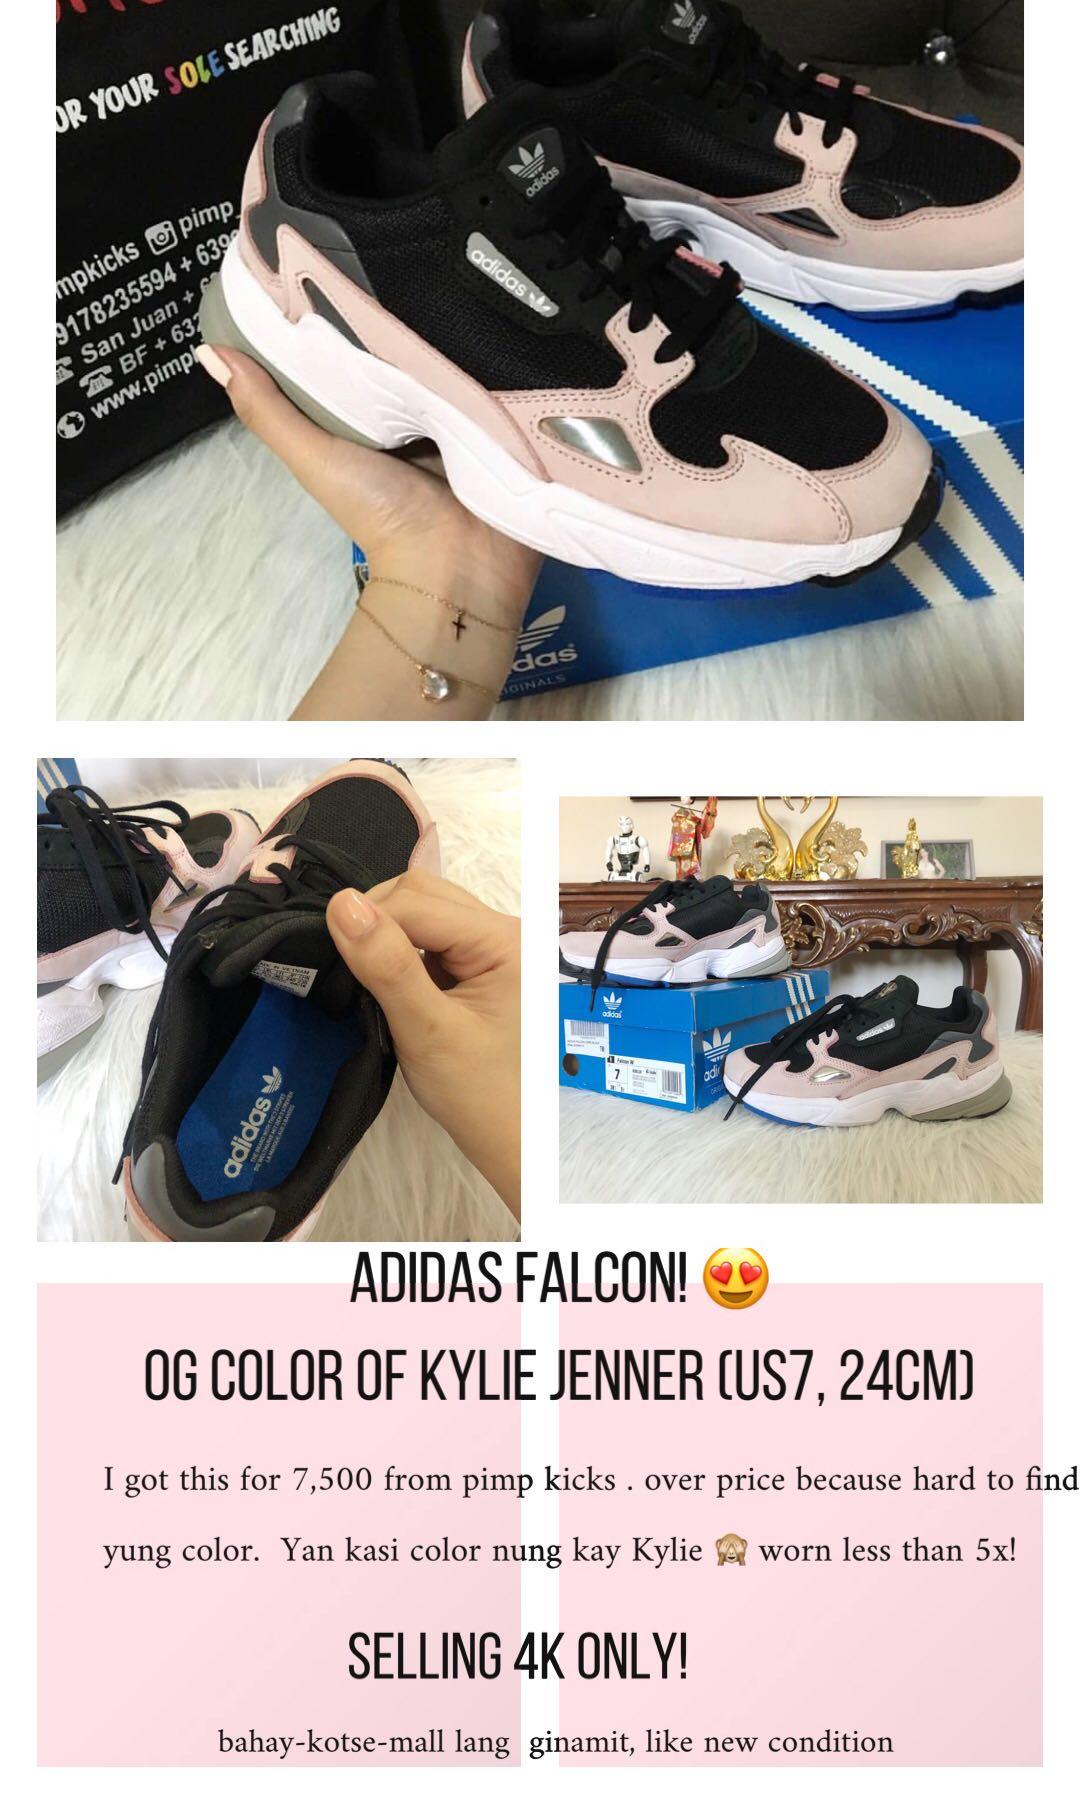 falcon kylie jenner price